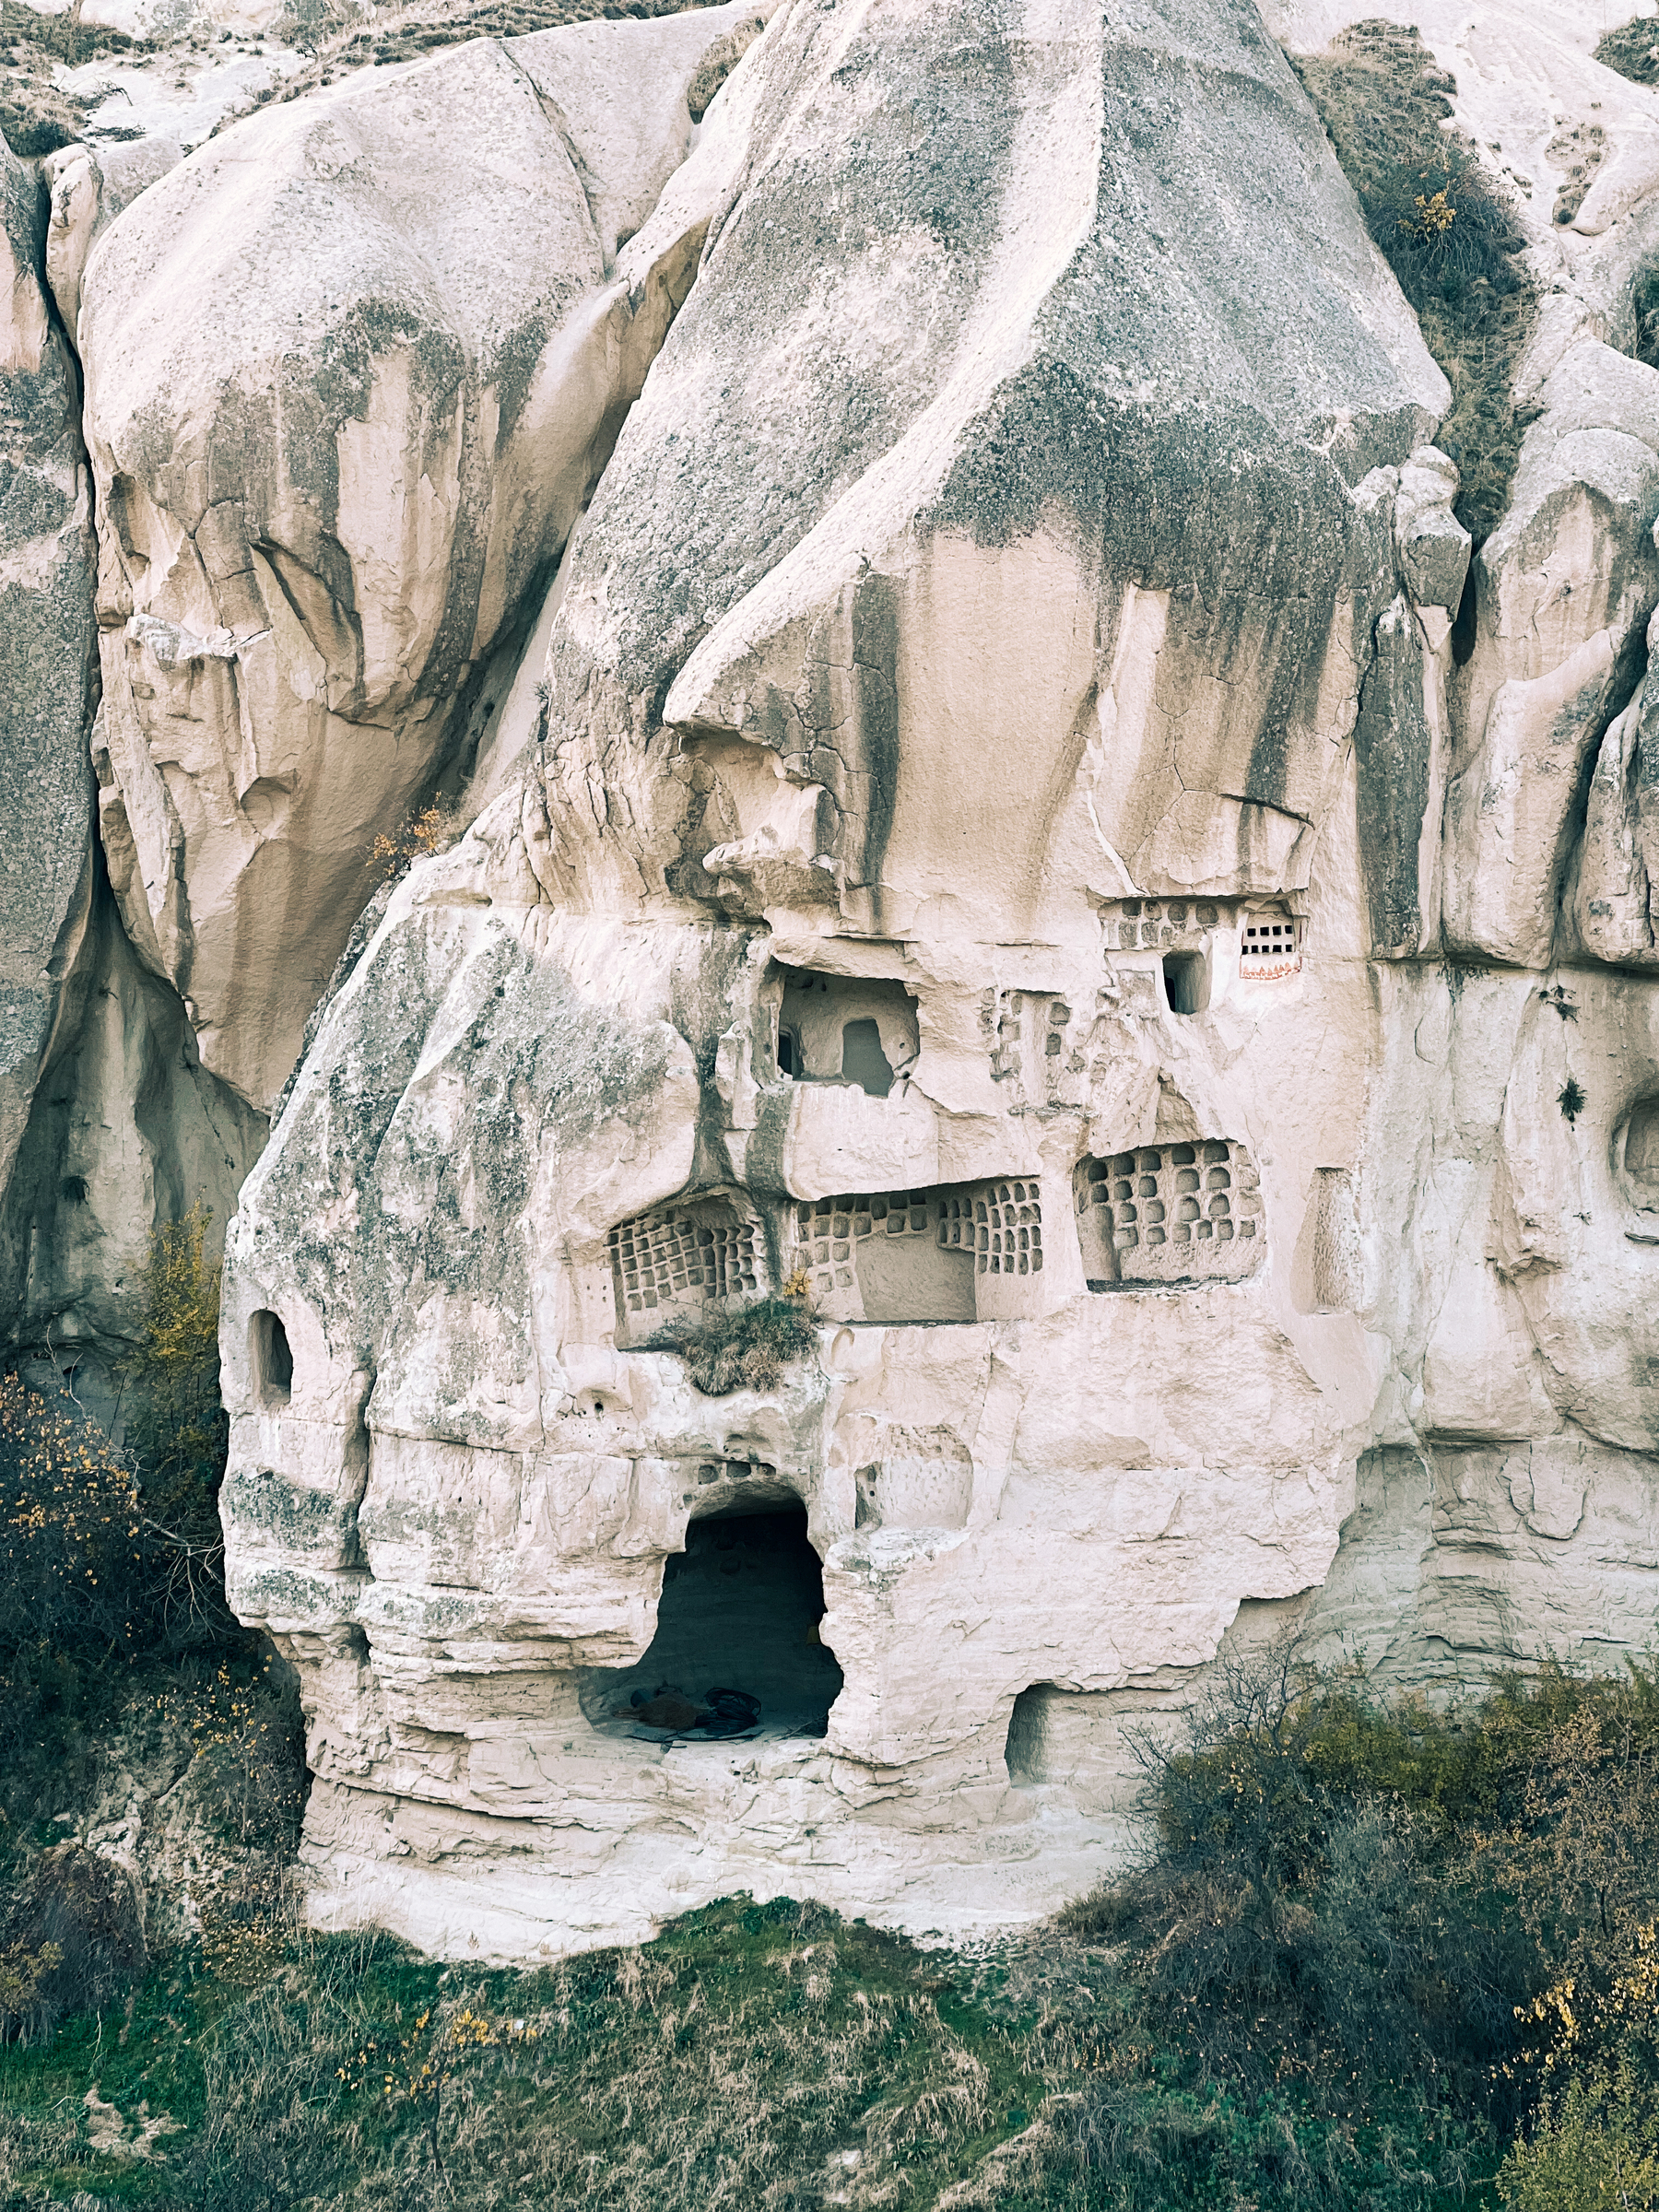 Houses carved into rock formations. 